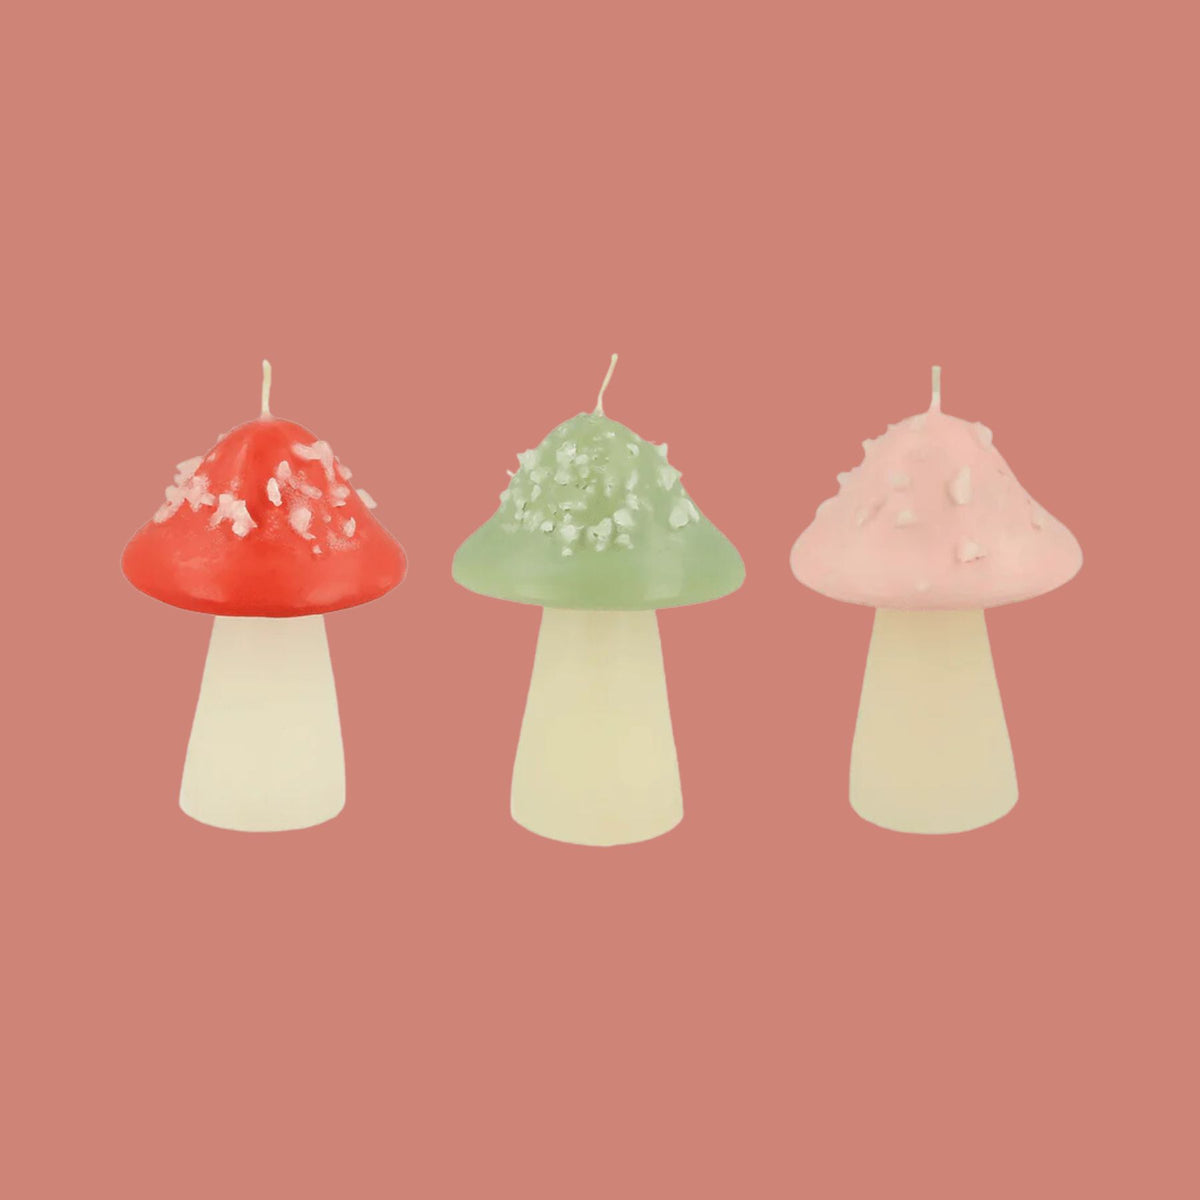 Mushroom candles are live! Hurry—there's only one of each 🍄